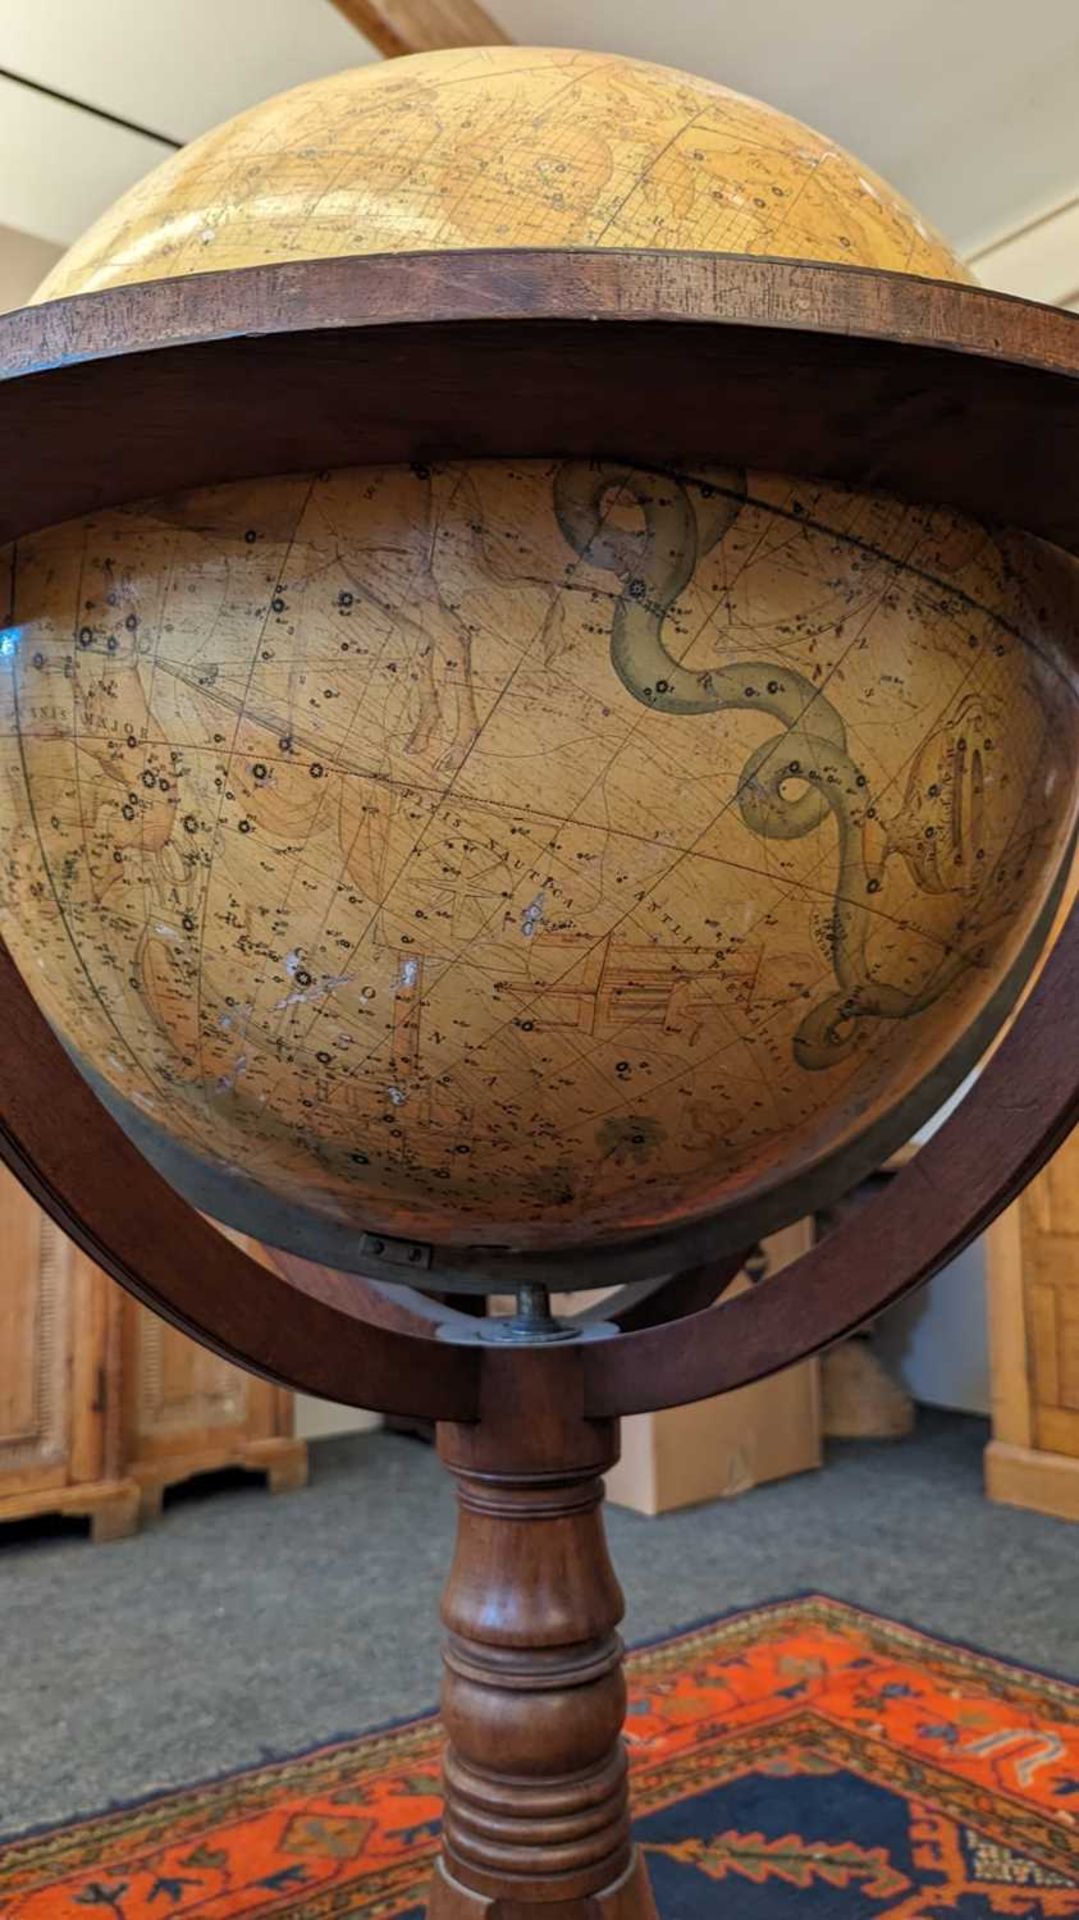 A large celestial library globe by J & W Cary, - Image 21 of 84